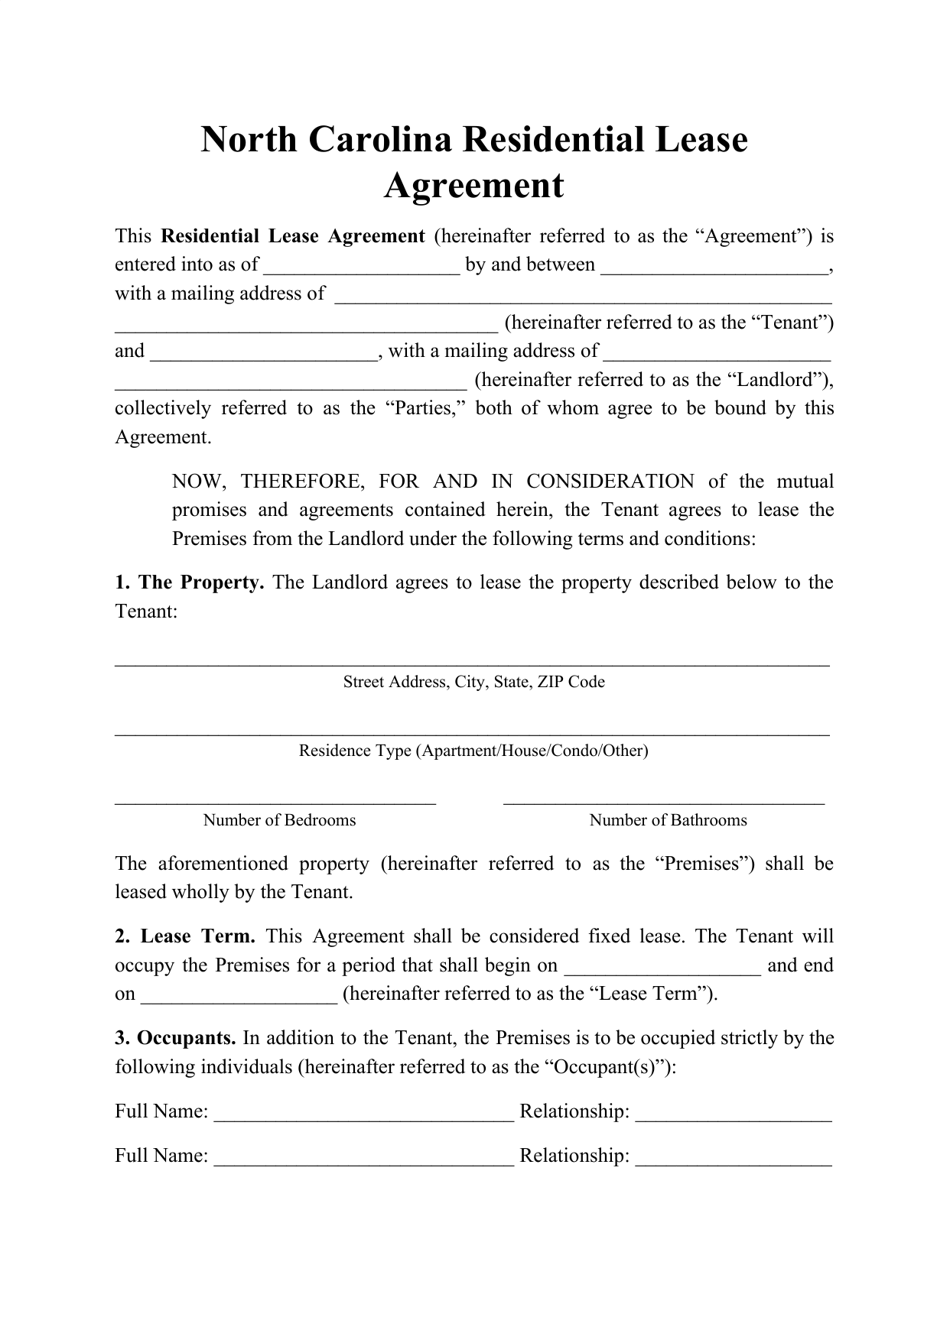 north carolina residential lease agreement template download printable pdf templateroller